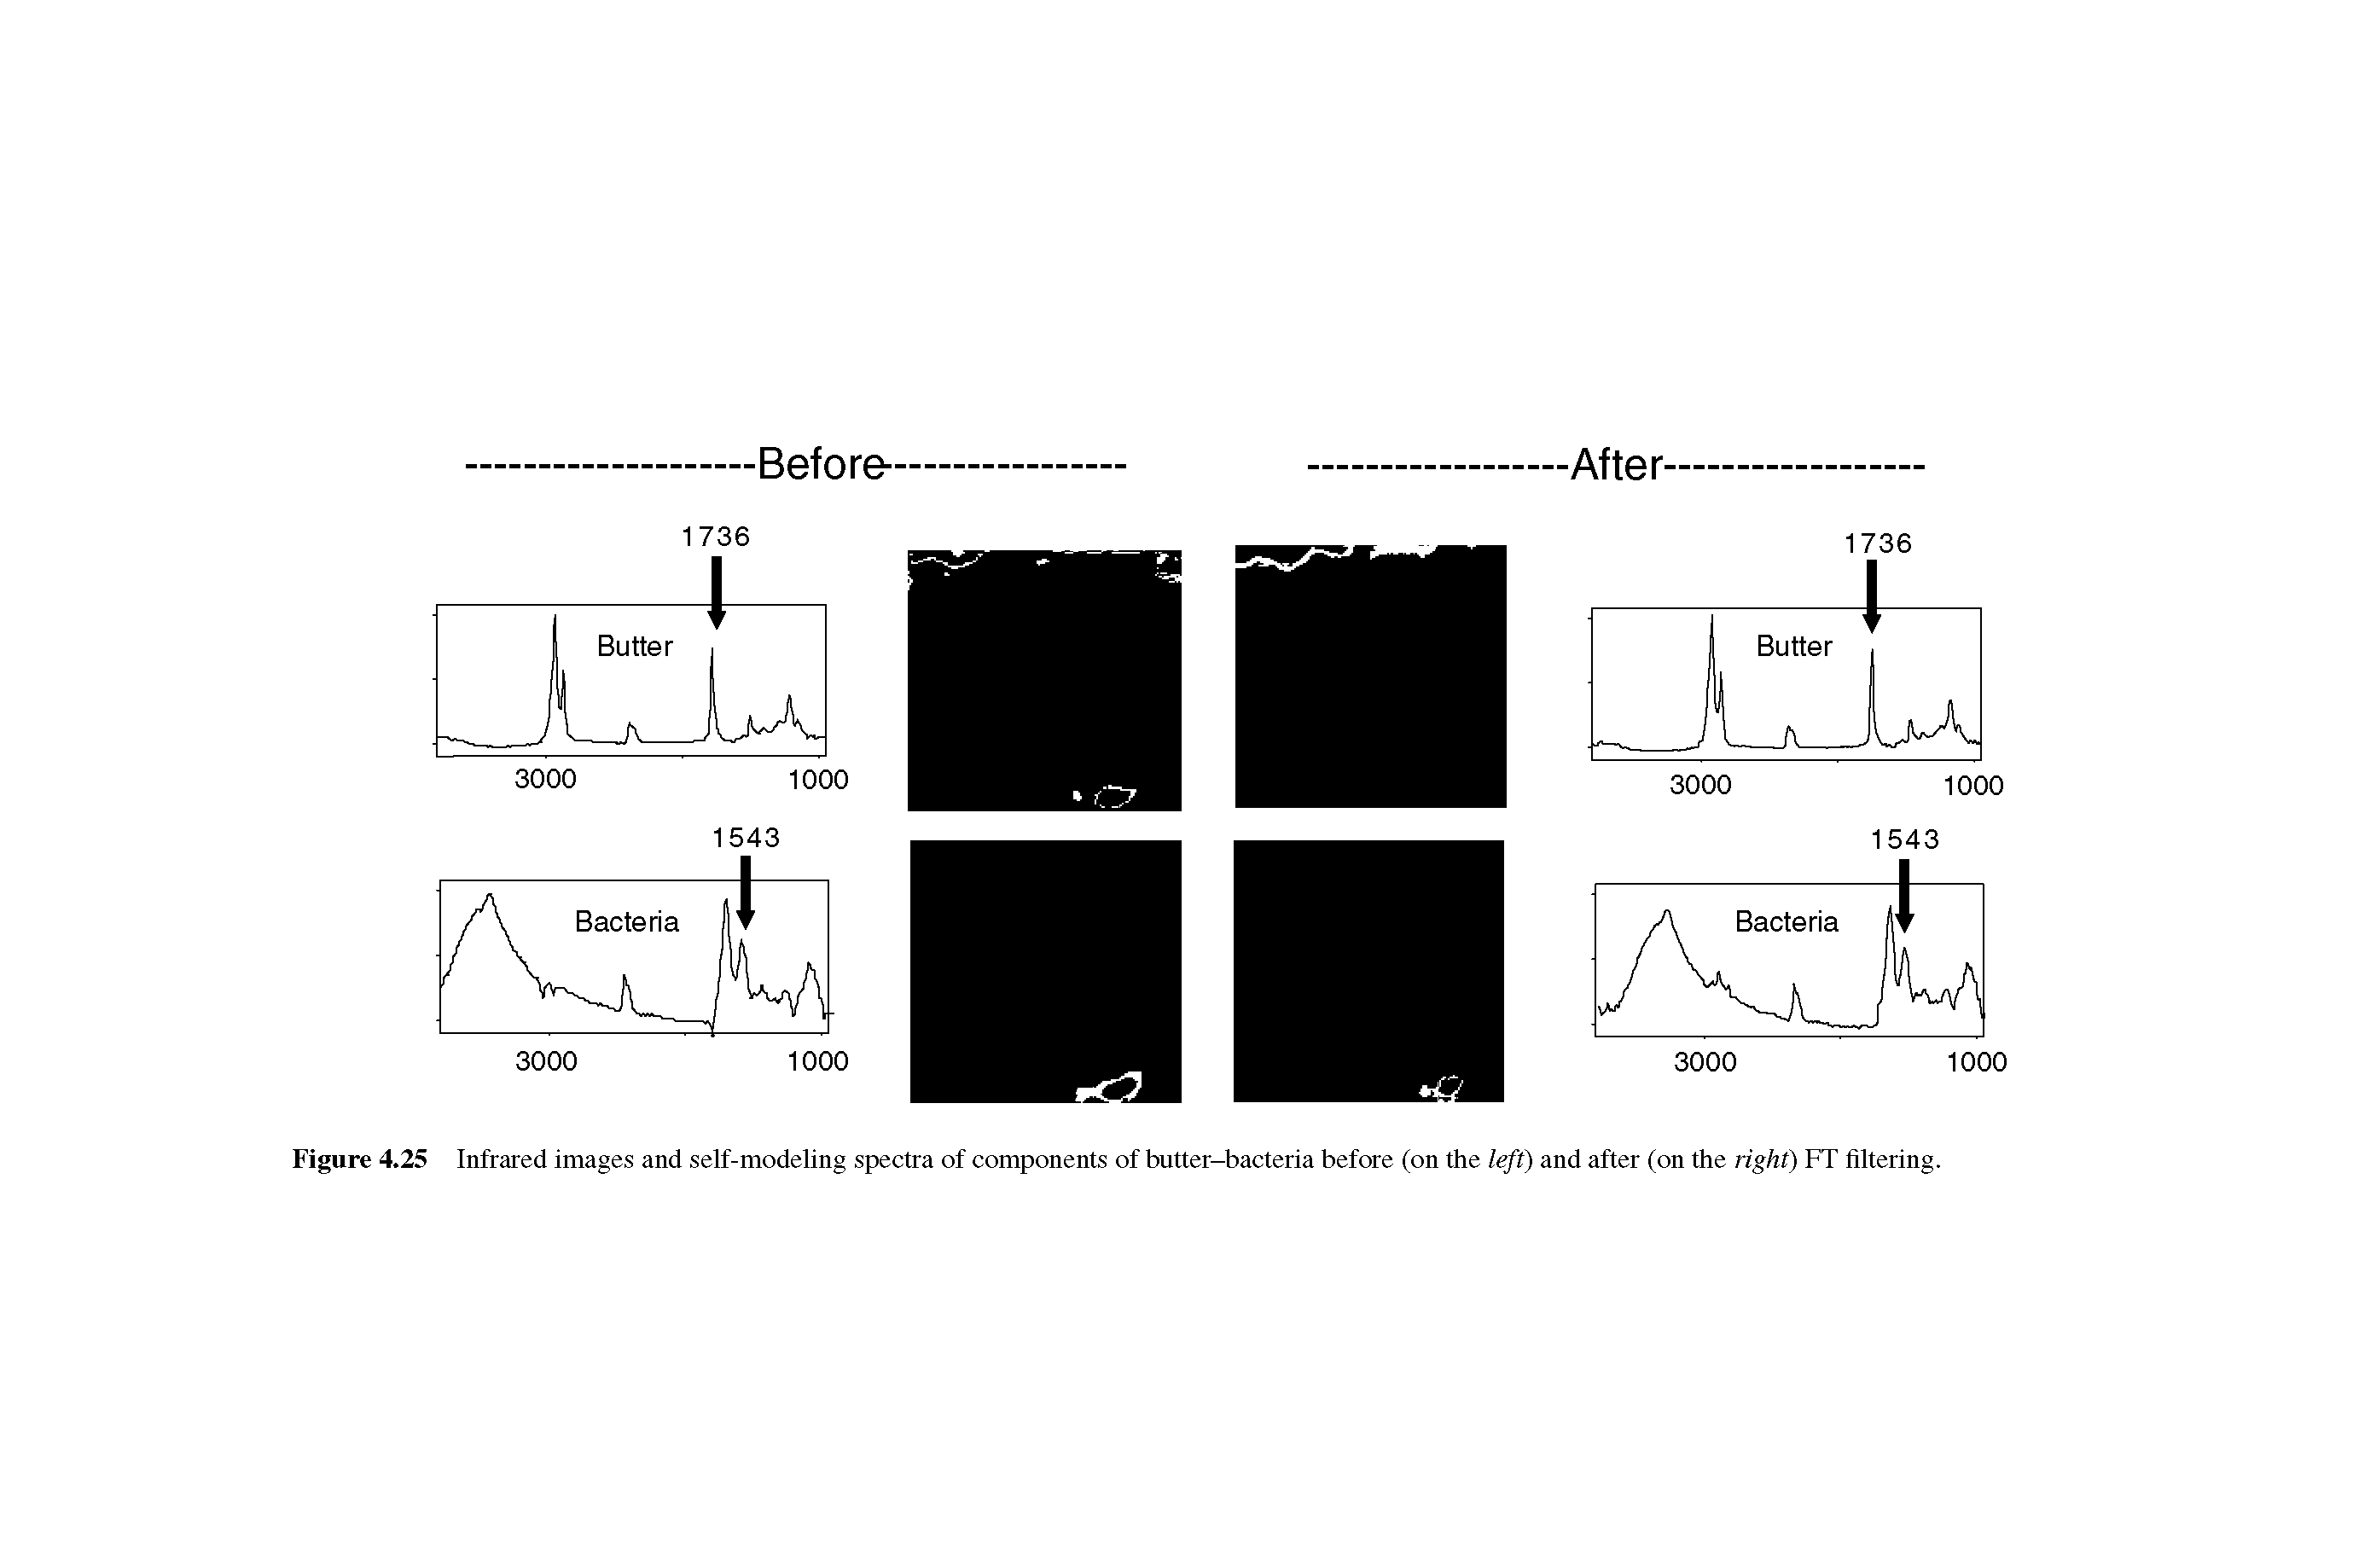 Figure 4.25 Infrared images and self-modeling spectra of components of butter-bacteria before (on the left) and after (on the right) FT filtering.